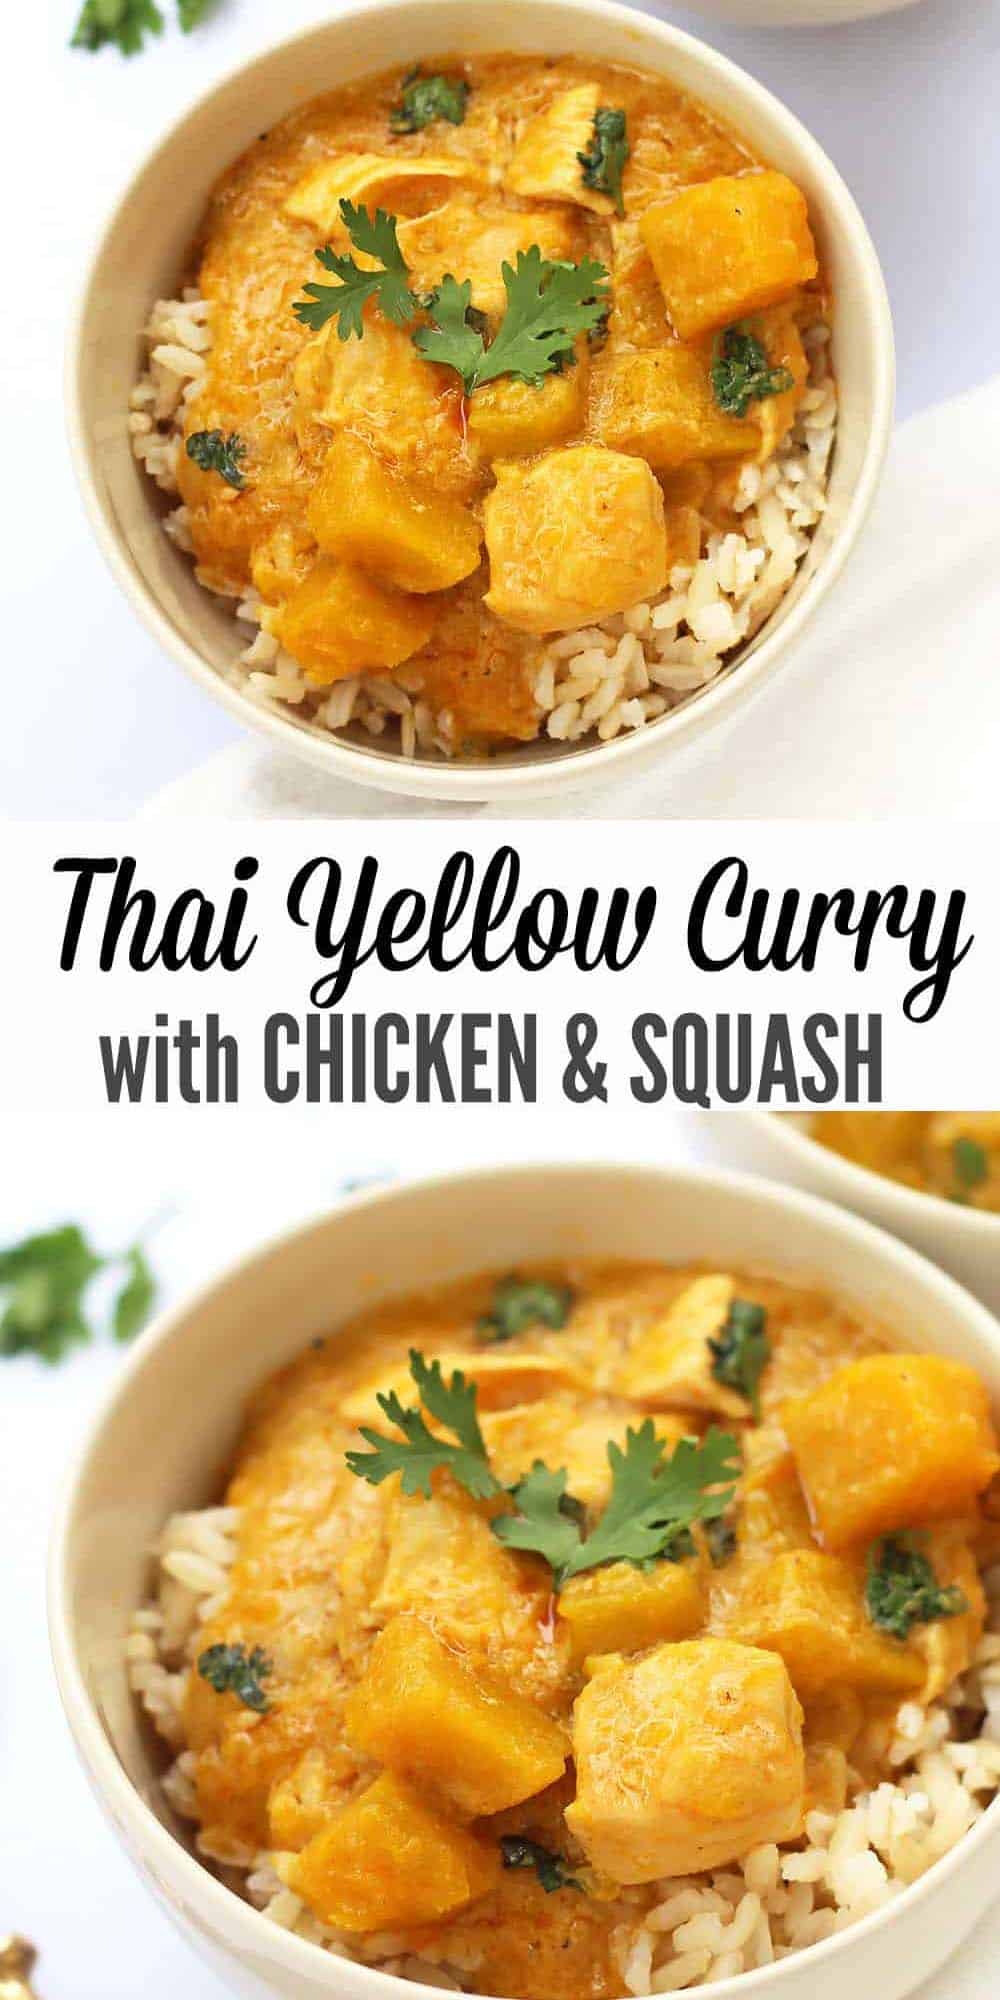 Thai Yellow Coconut Curry with Chicken and Kabocha Squash